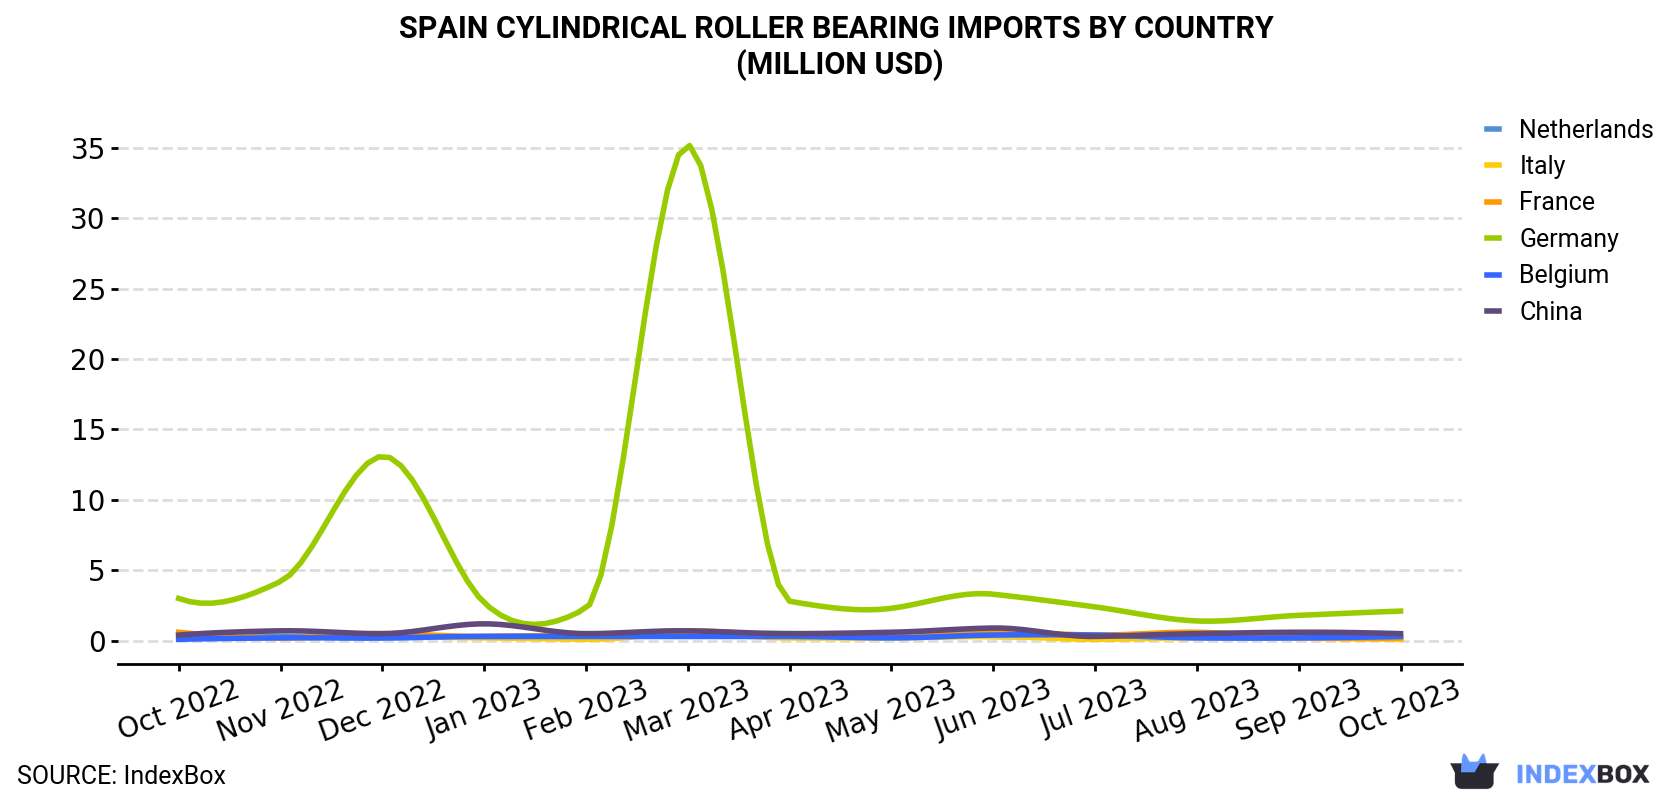 Spain Cylindrical Roller Bearing Imports By Country (Million USD)